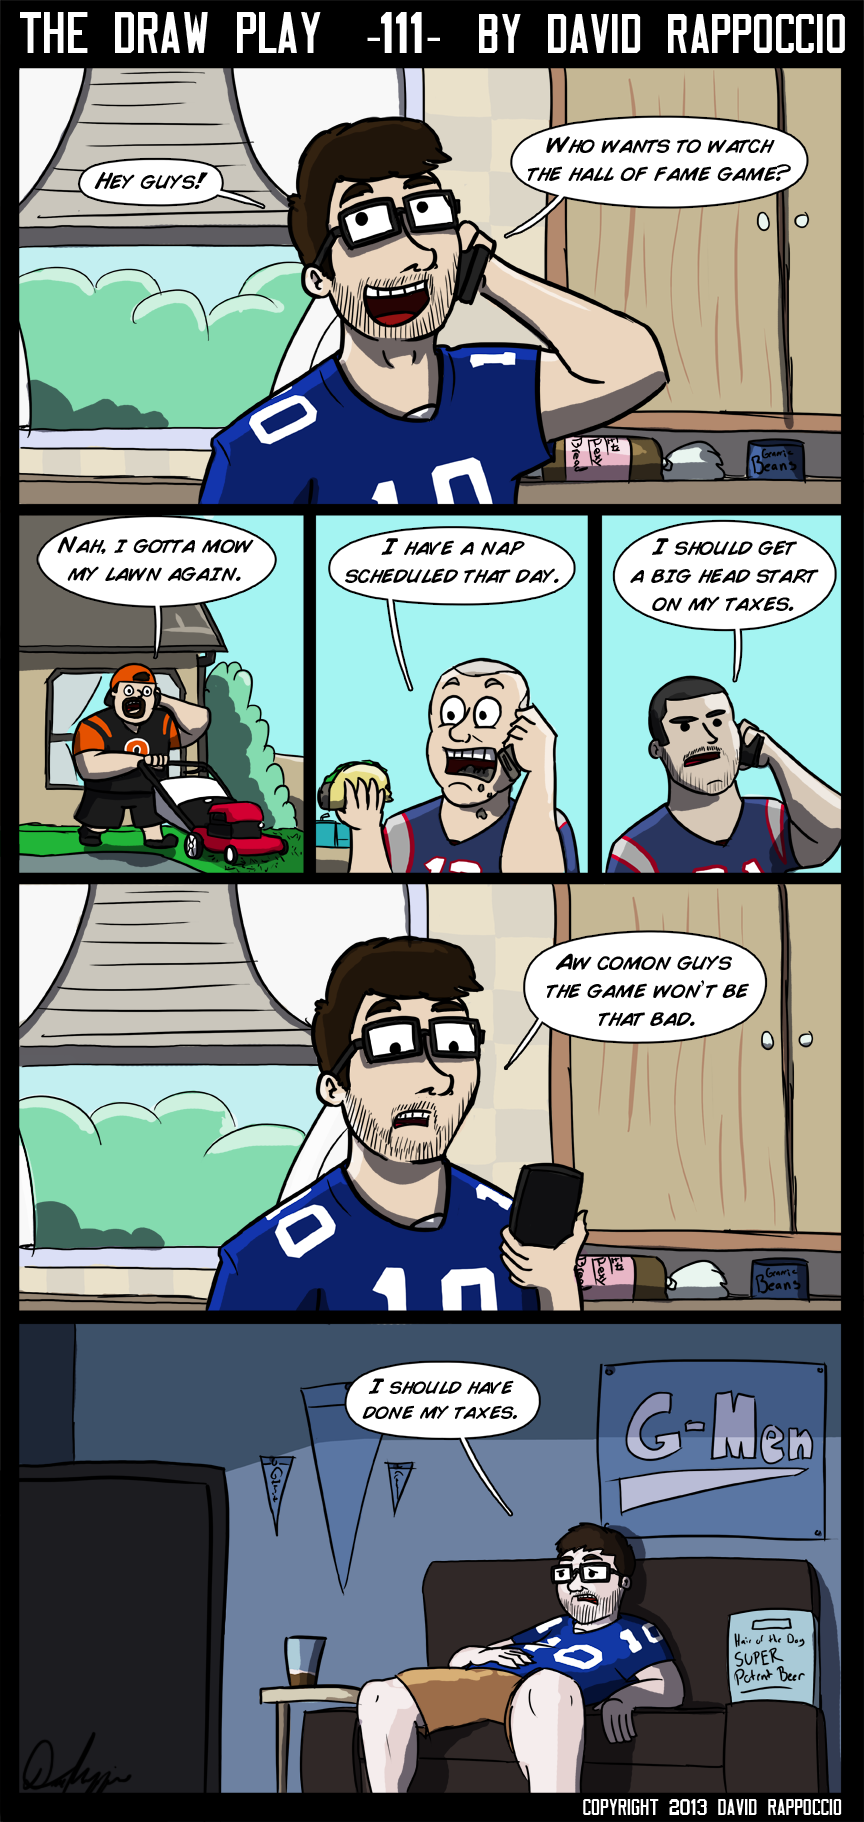 This comic dedicated to my 602-2 football roomies in college